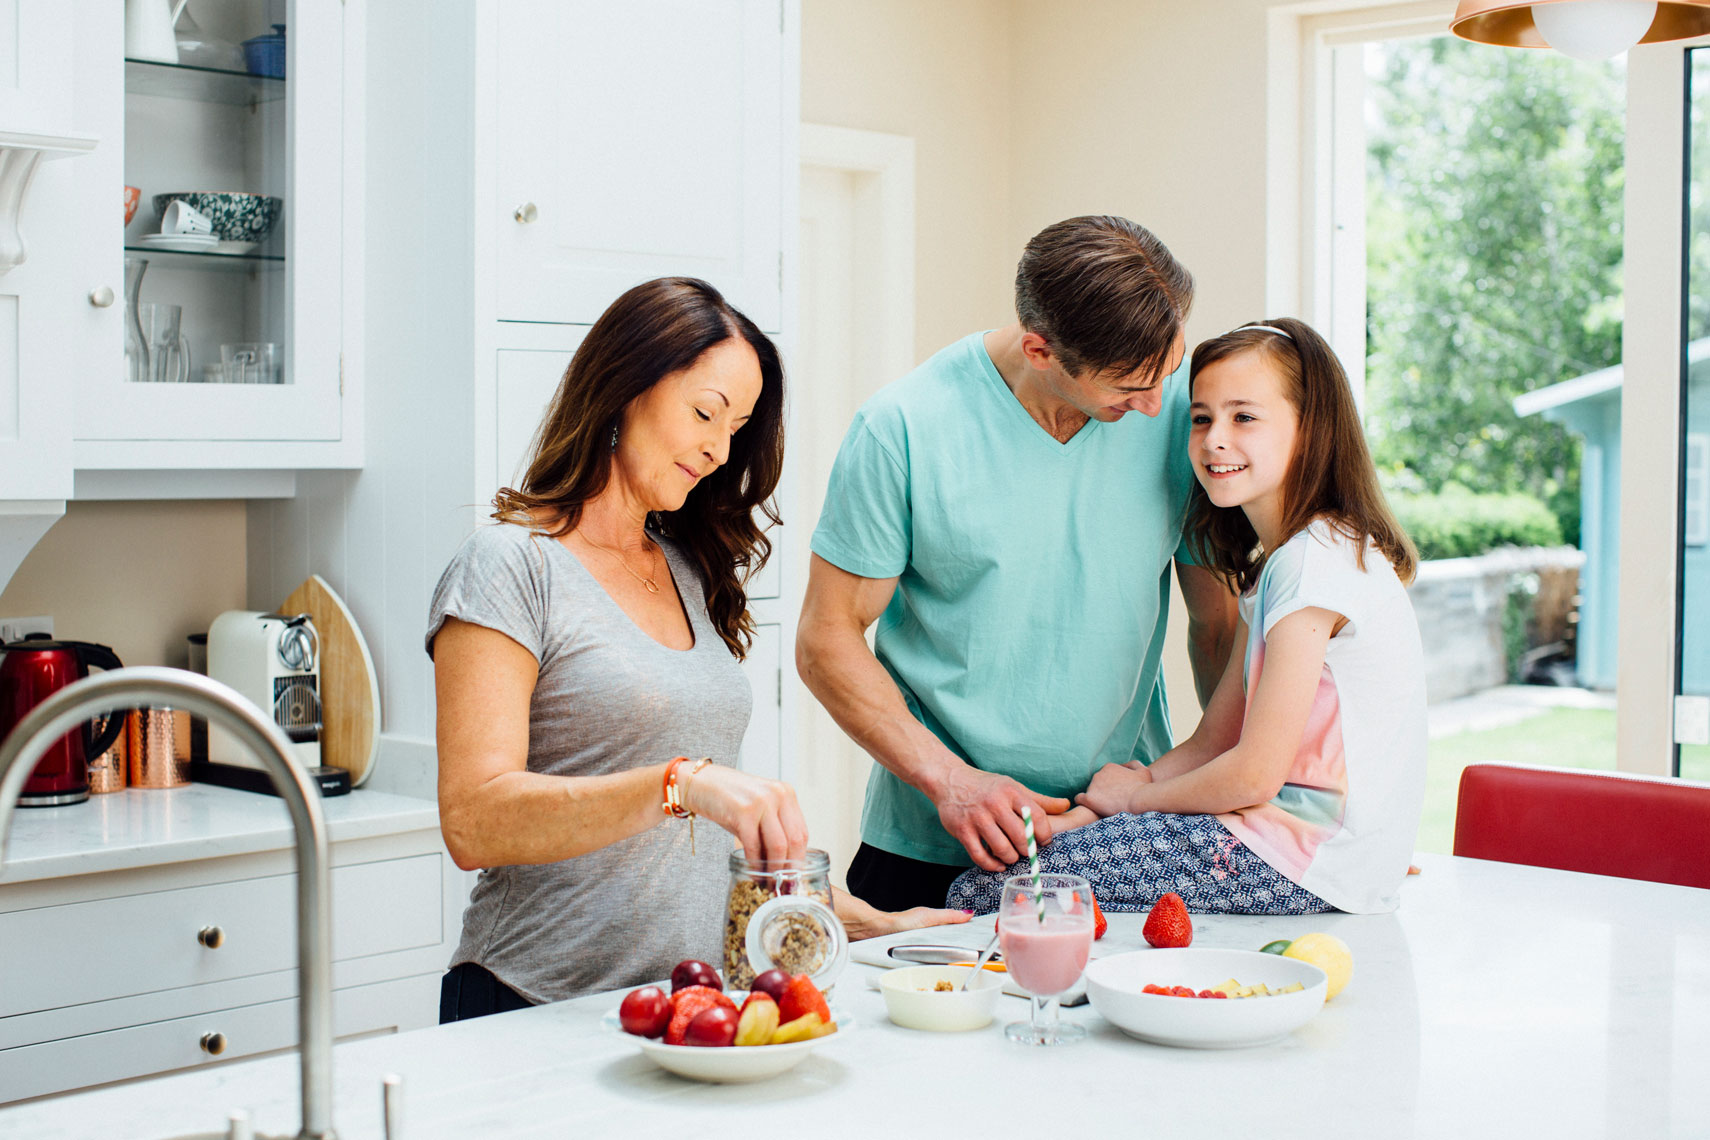 location portrait photography: lifestyle image of family in kitchen